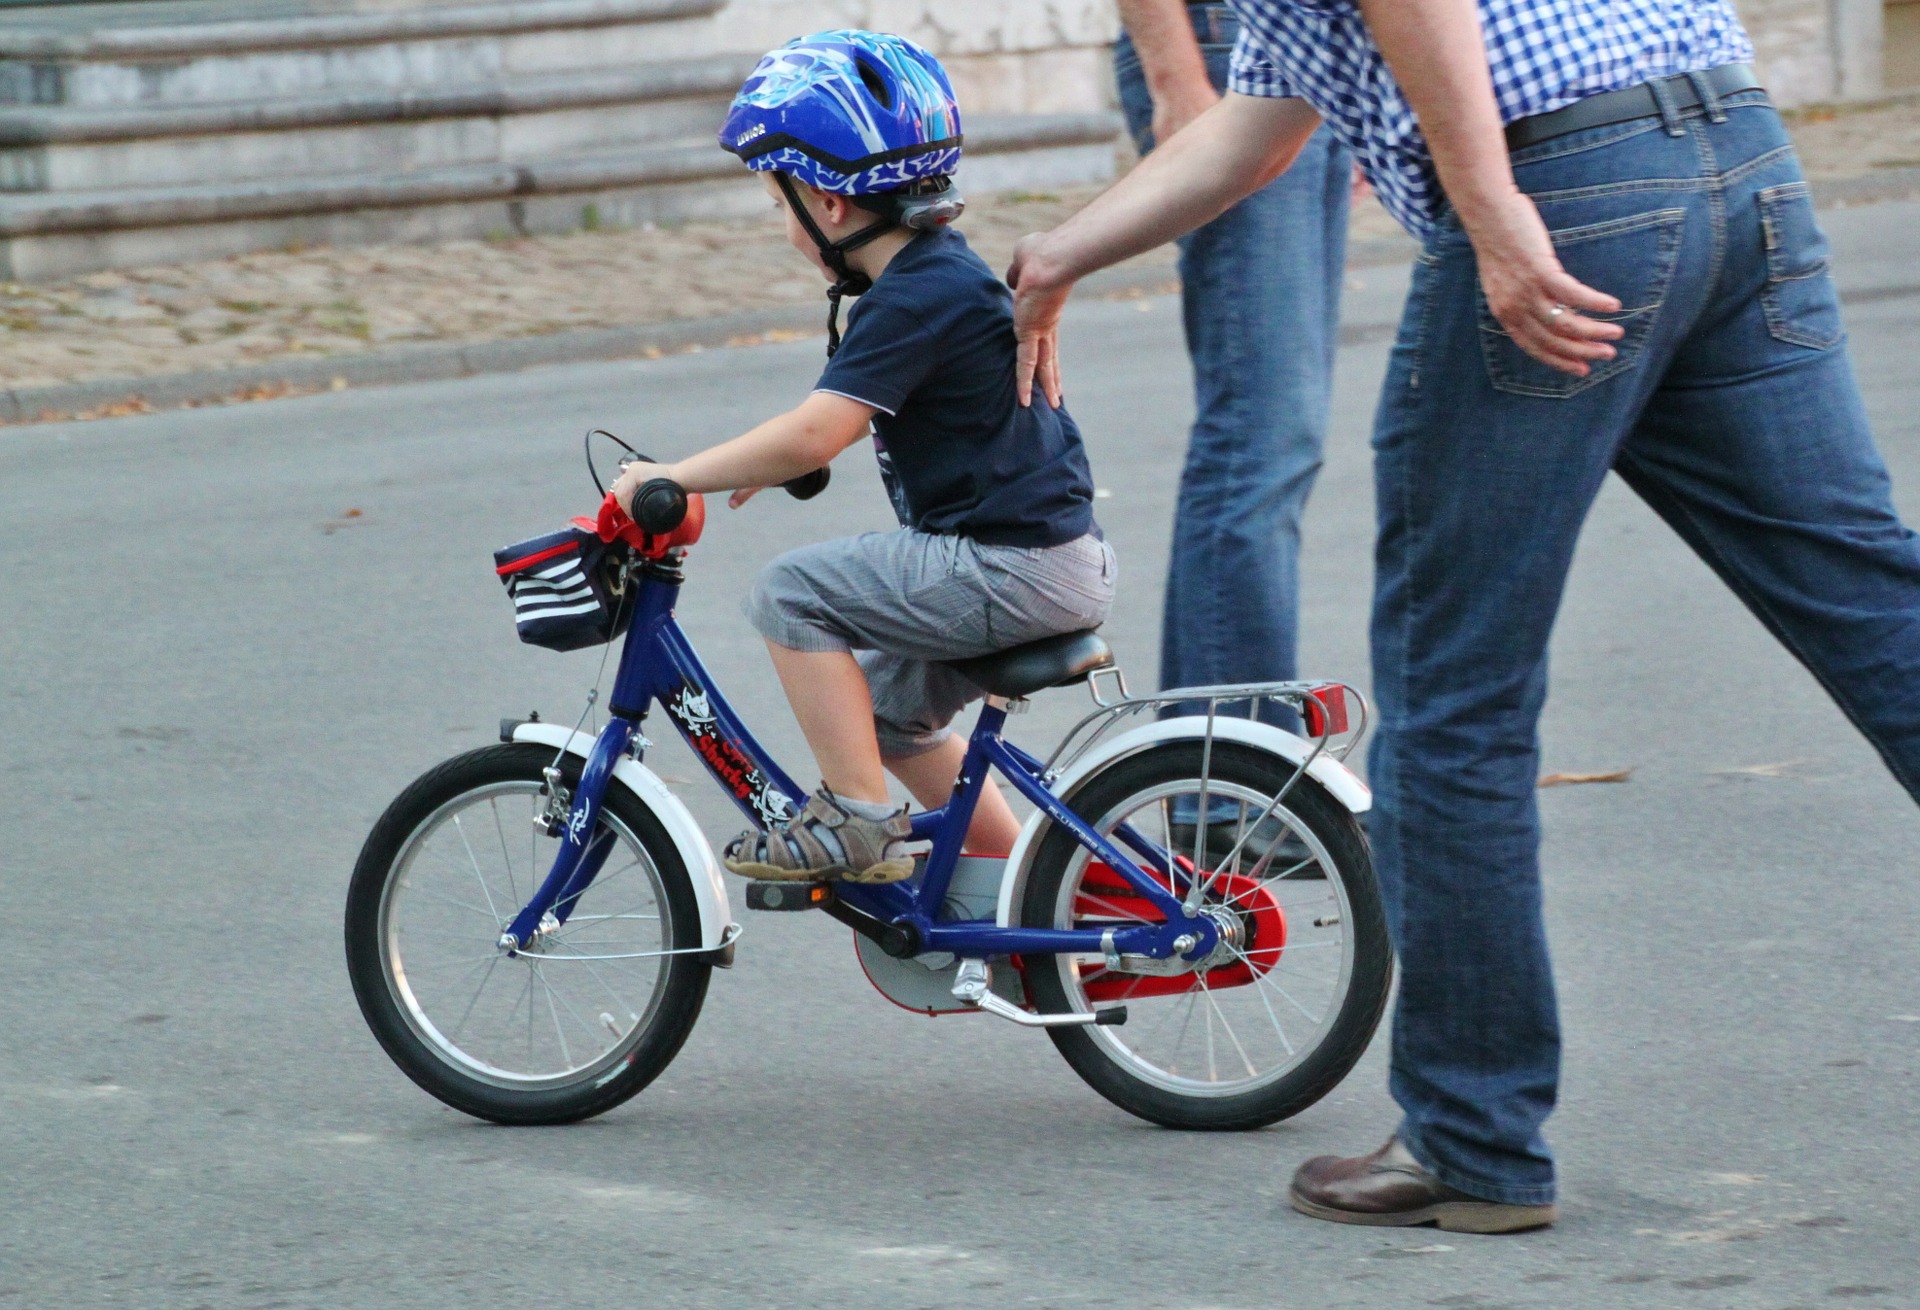 Man supports a child learning how to ride a bike.